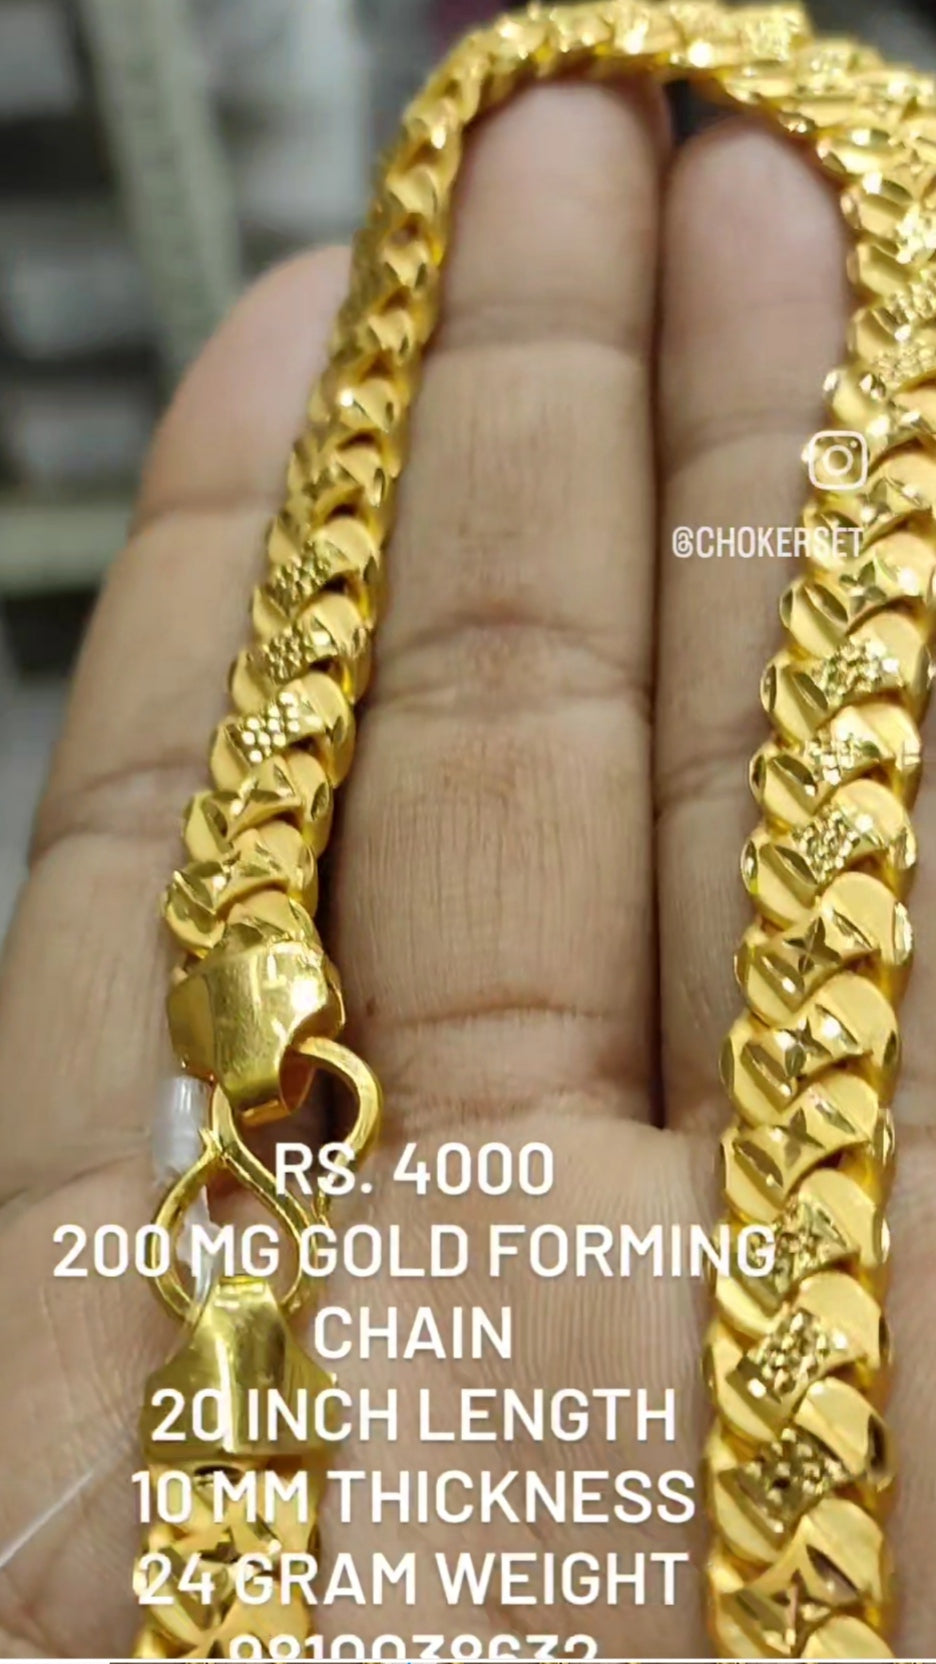 Chain 20 inch 24 Gram 200 MG 10 MM Gold Forming Chain From Chokerset 62670417